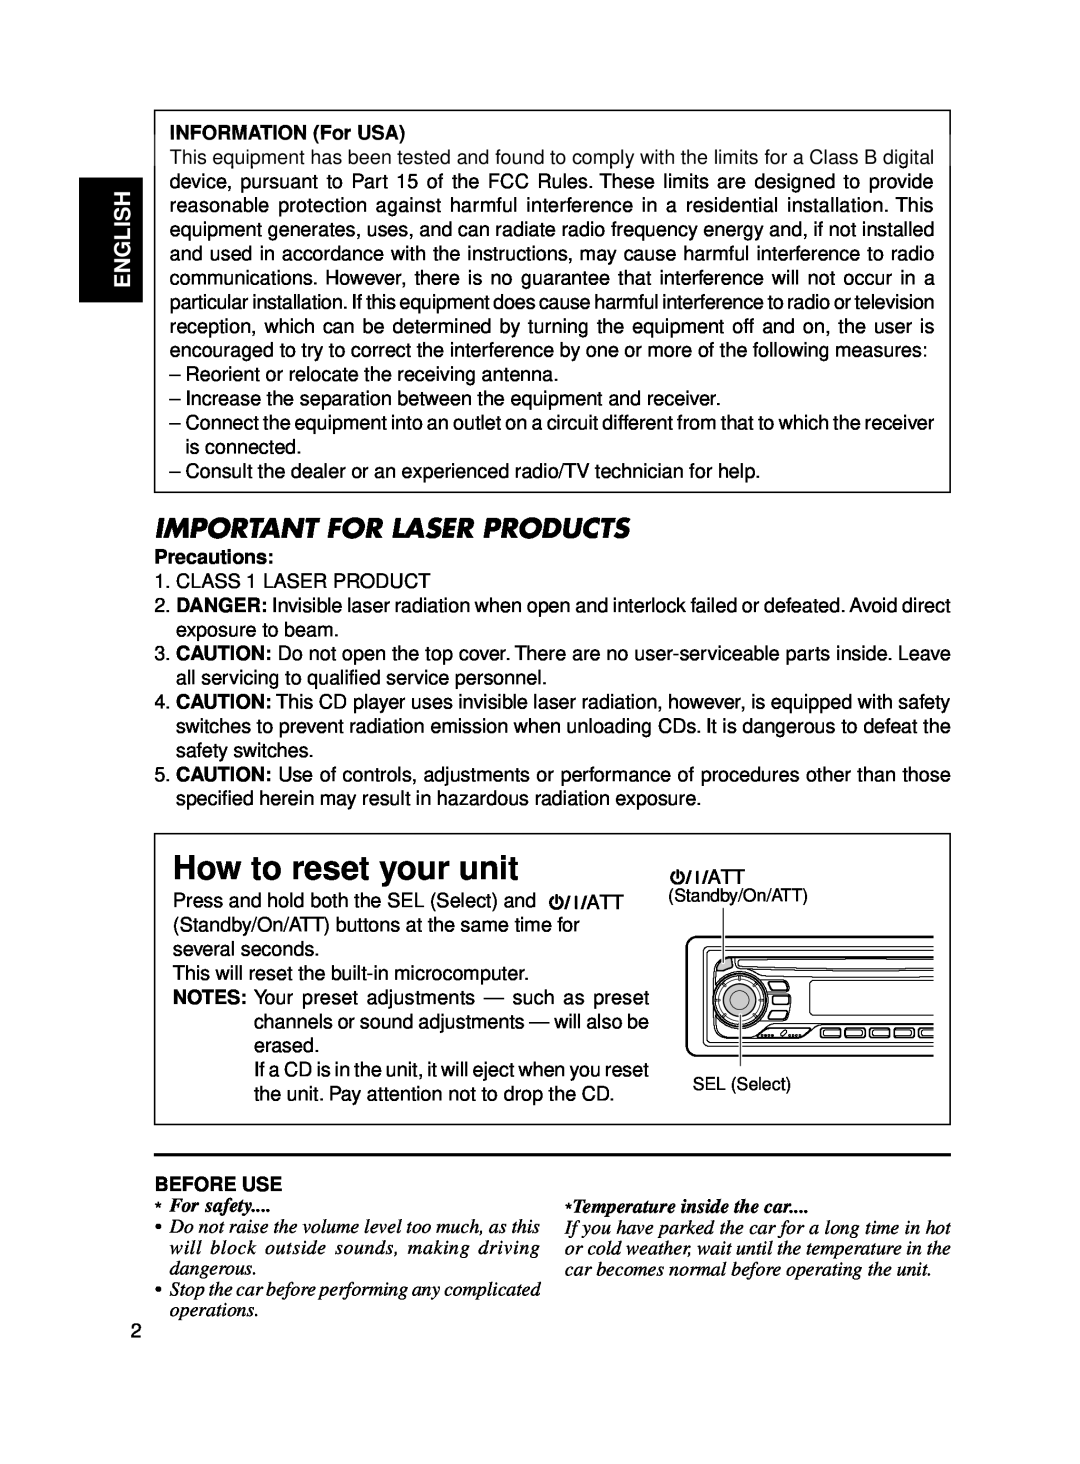 JVC KD-SX650 How to reset your unit, Important For Laser Products, English, INFORMATION For USA, Precautions, Before Use 